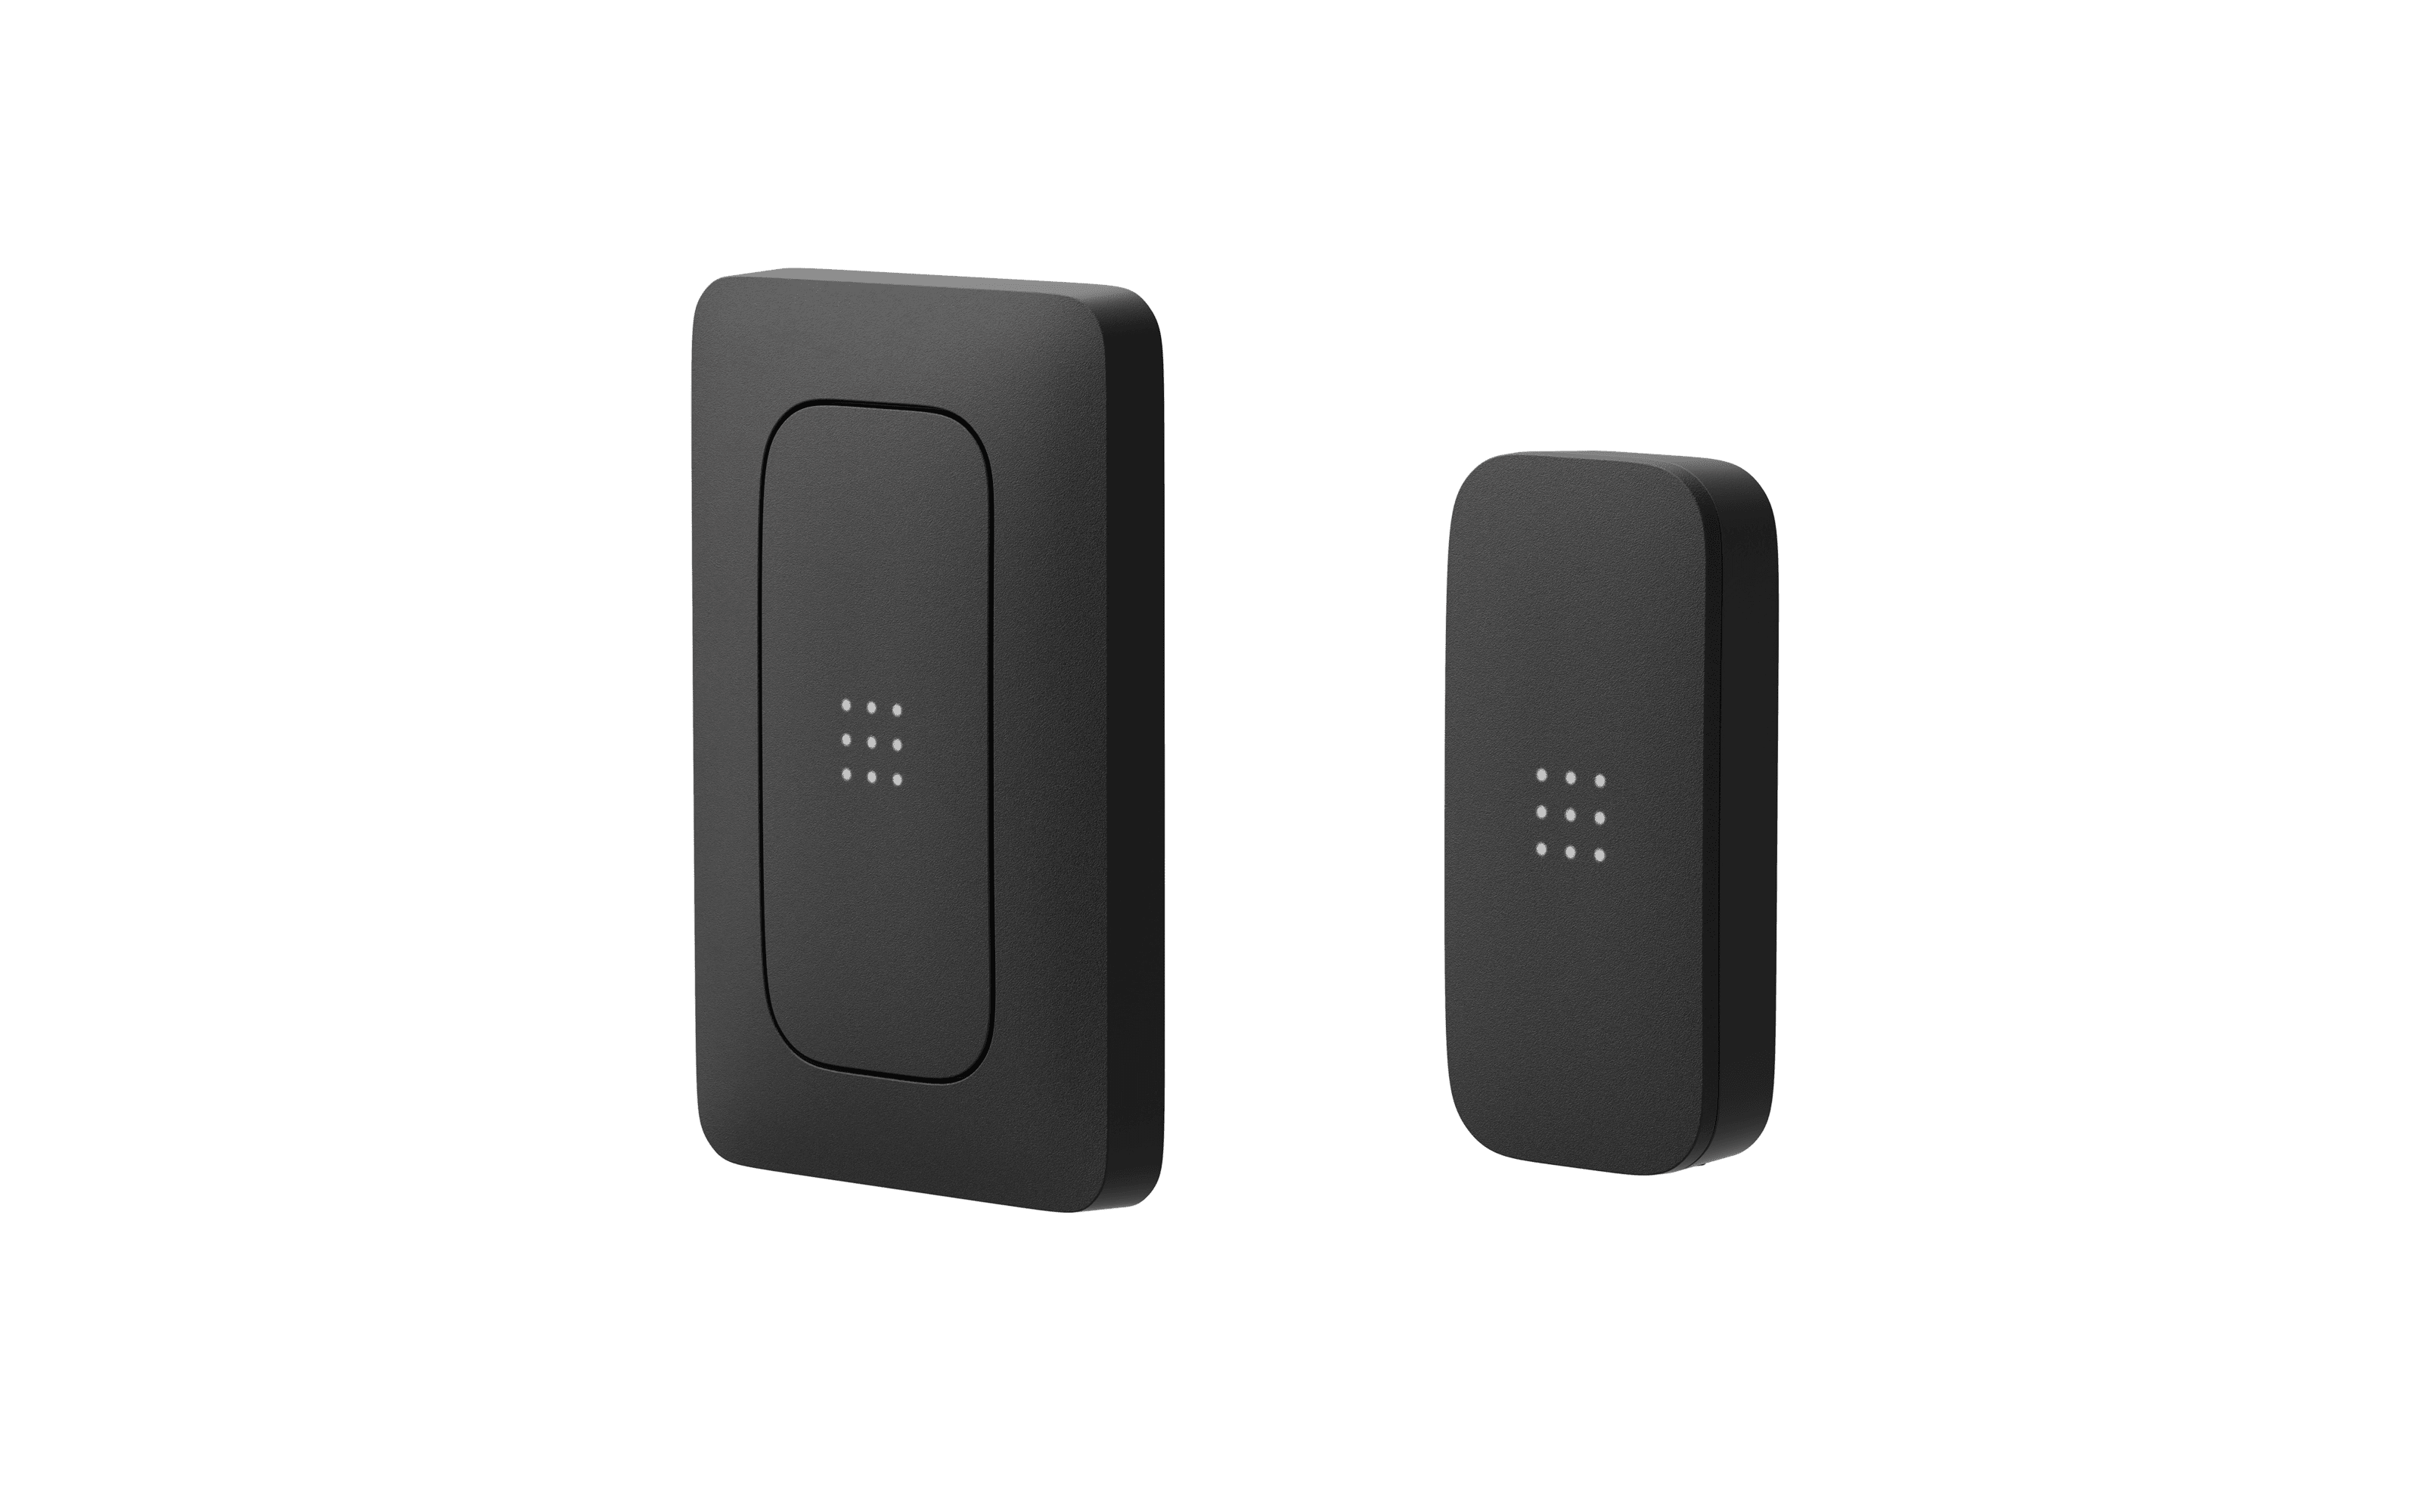 Access control card reader with 2 different formats - keycard access control